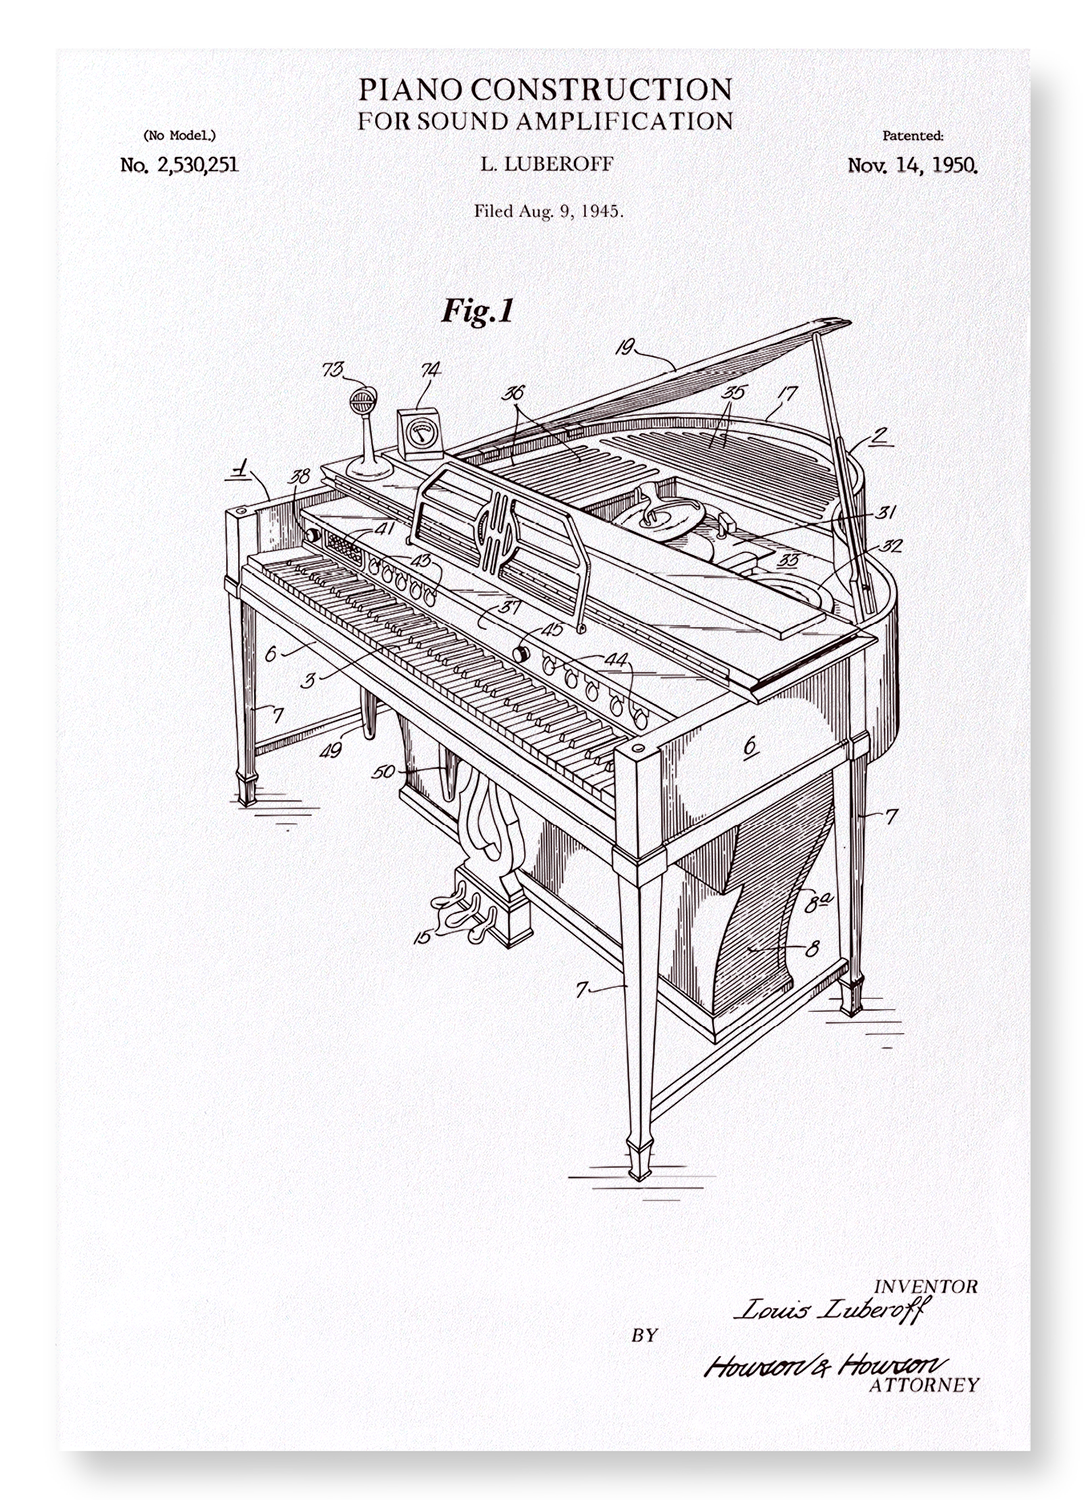 PATENT OF PIANO CONSTRUCTION (1950)